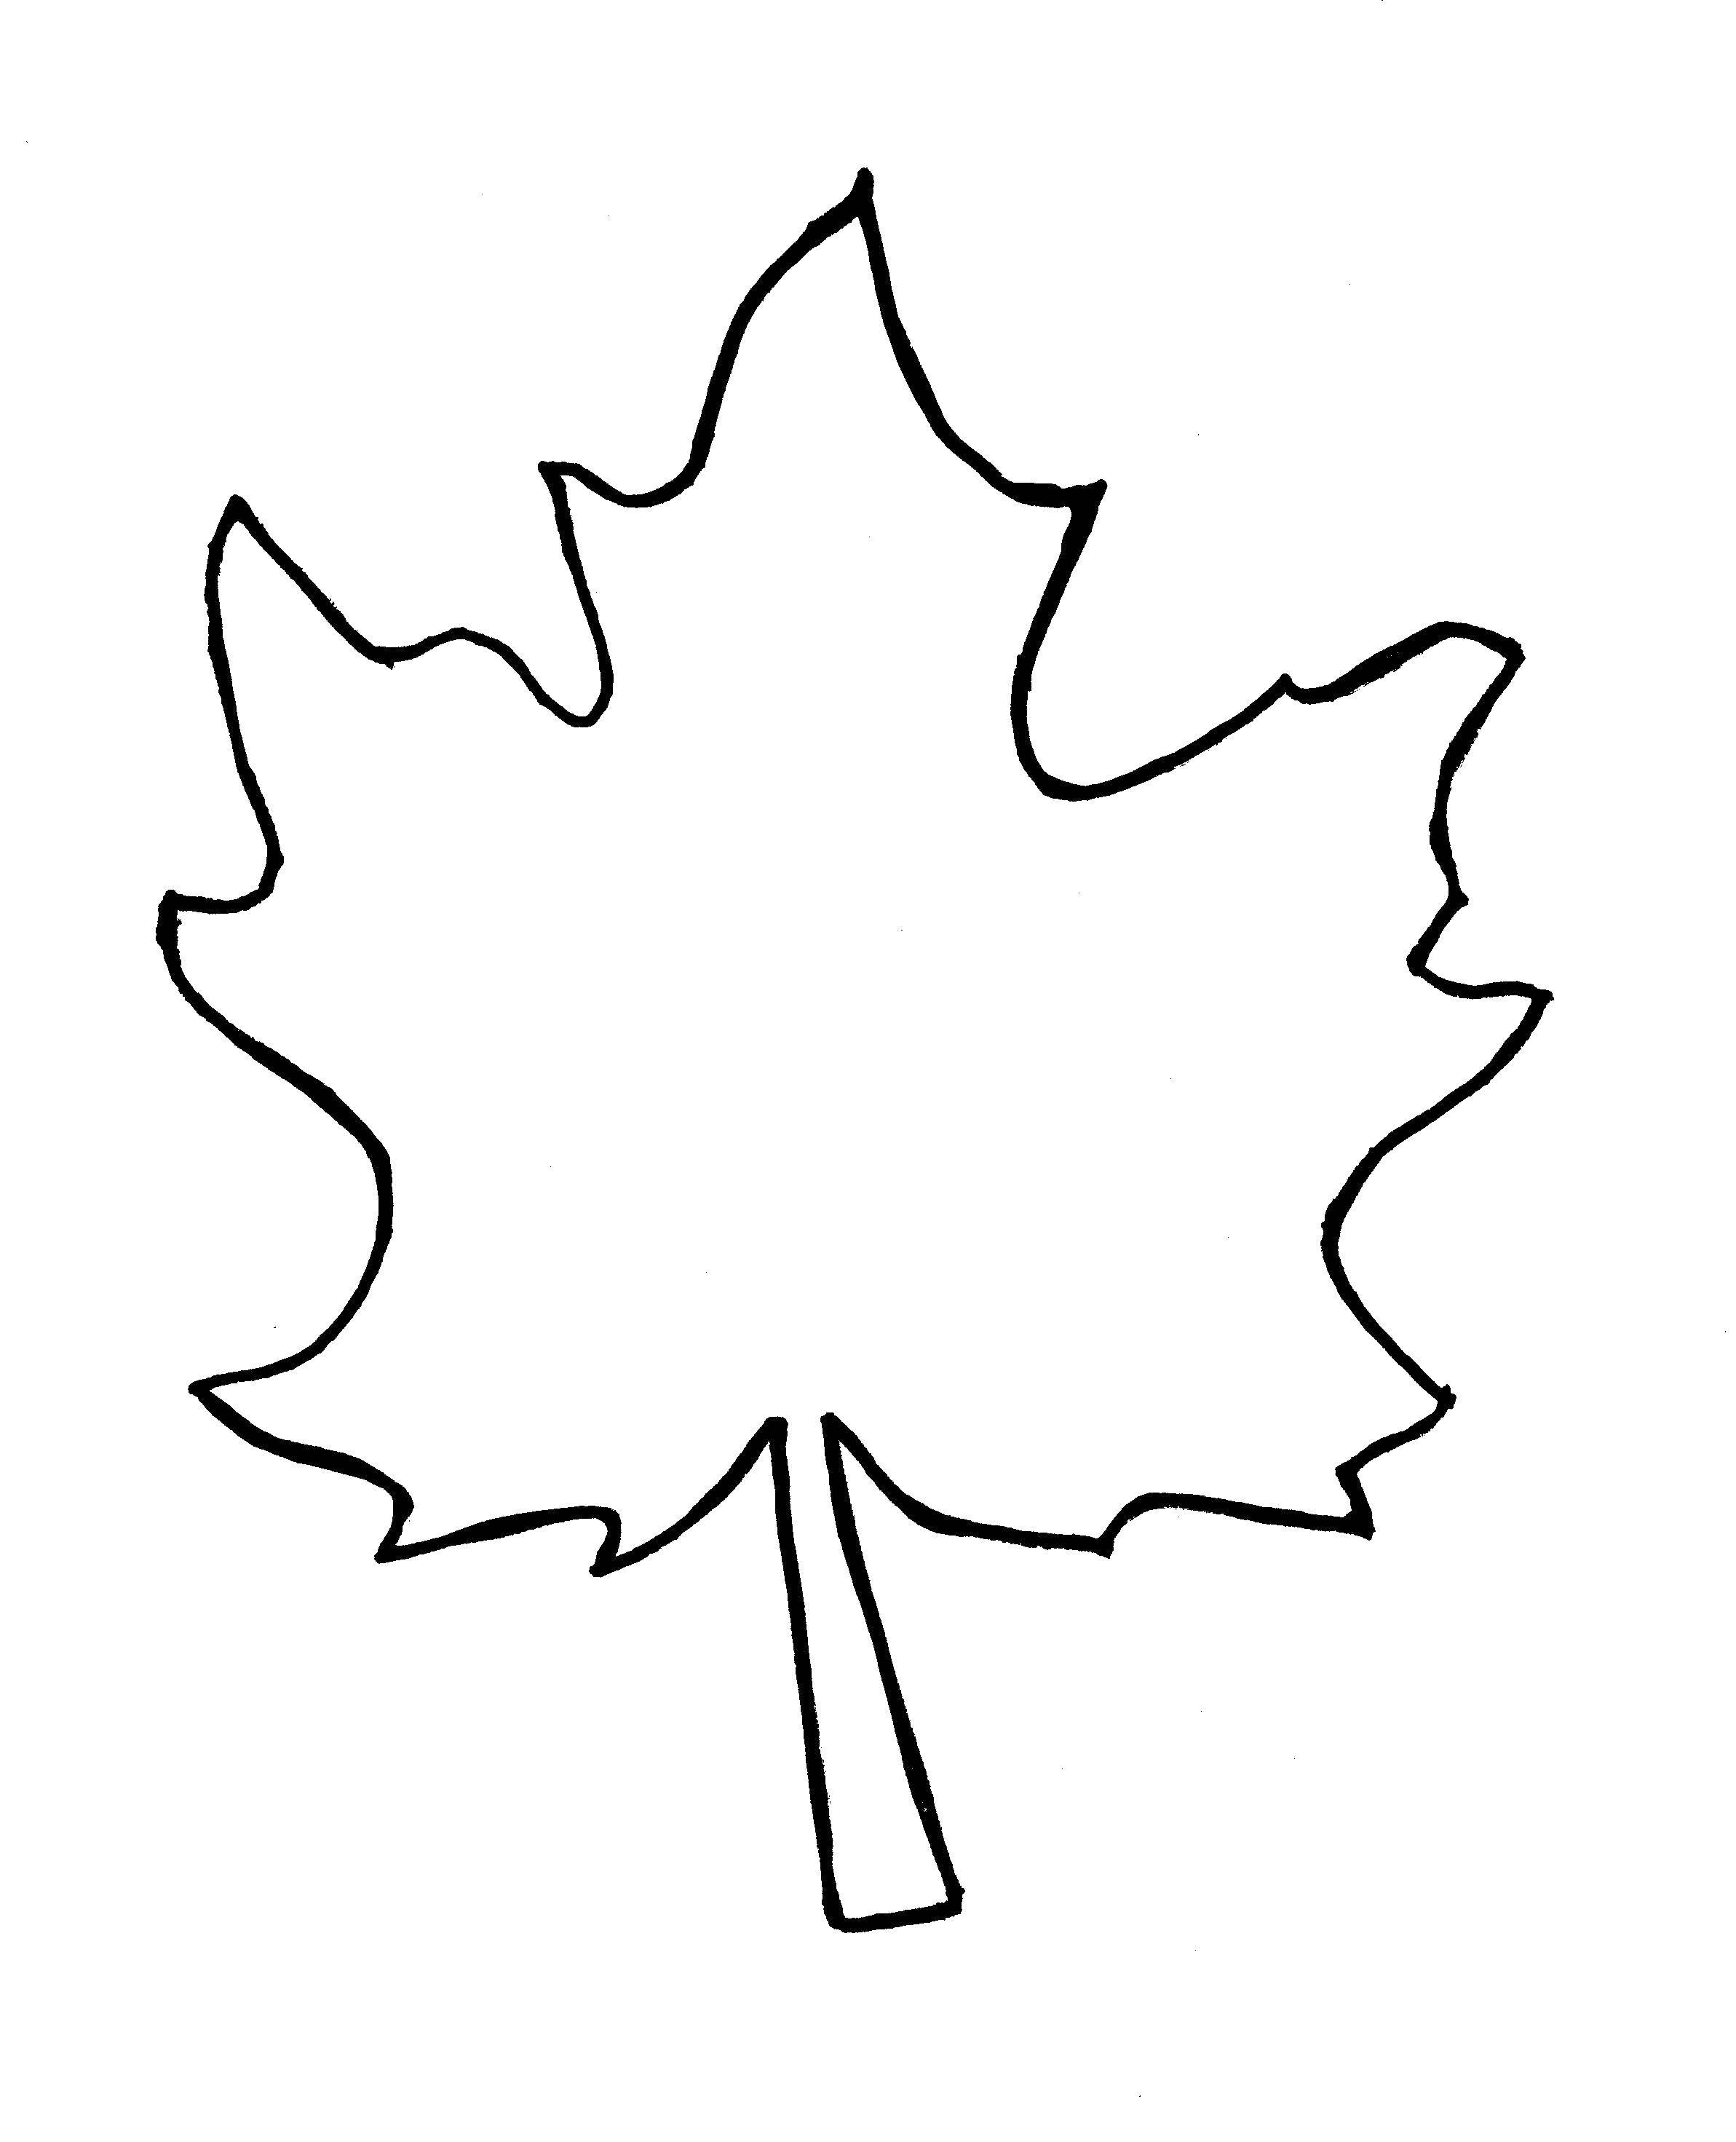 Coloring Sheet. Category The contours of the leaves of the trees. Tags:  leaf.